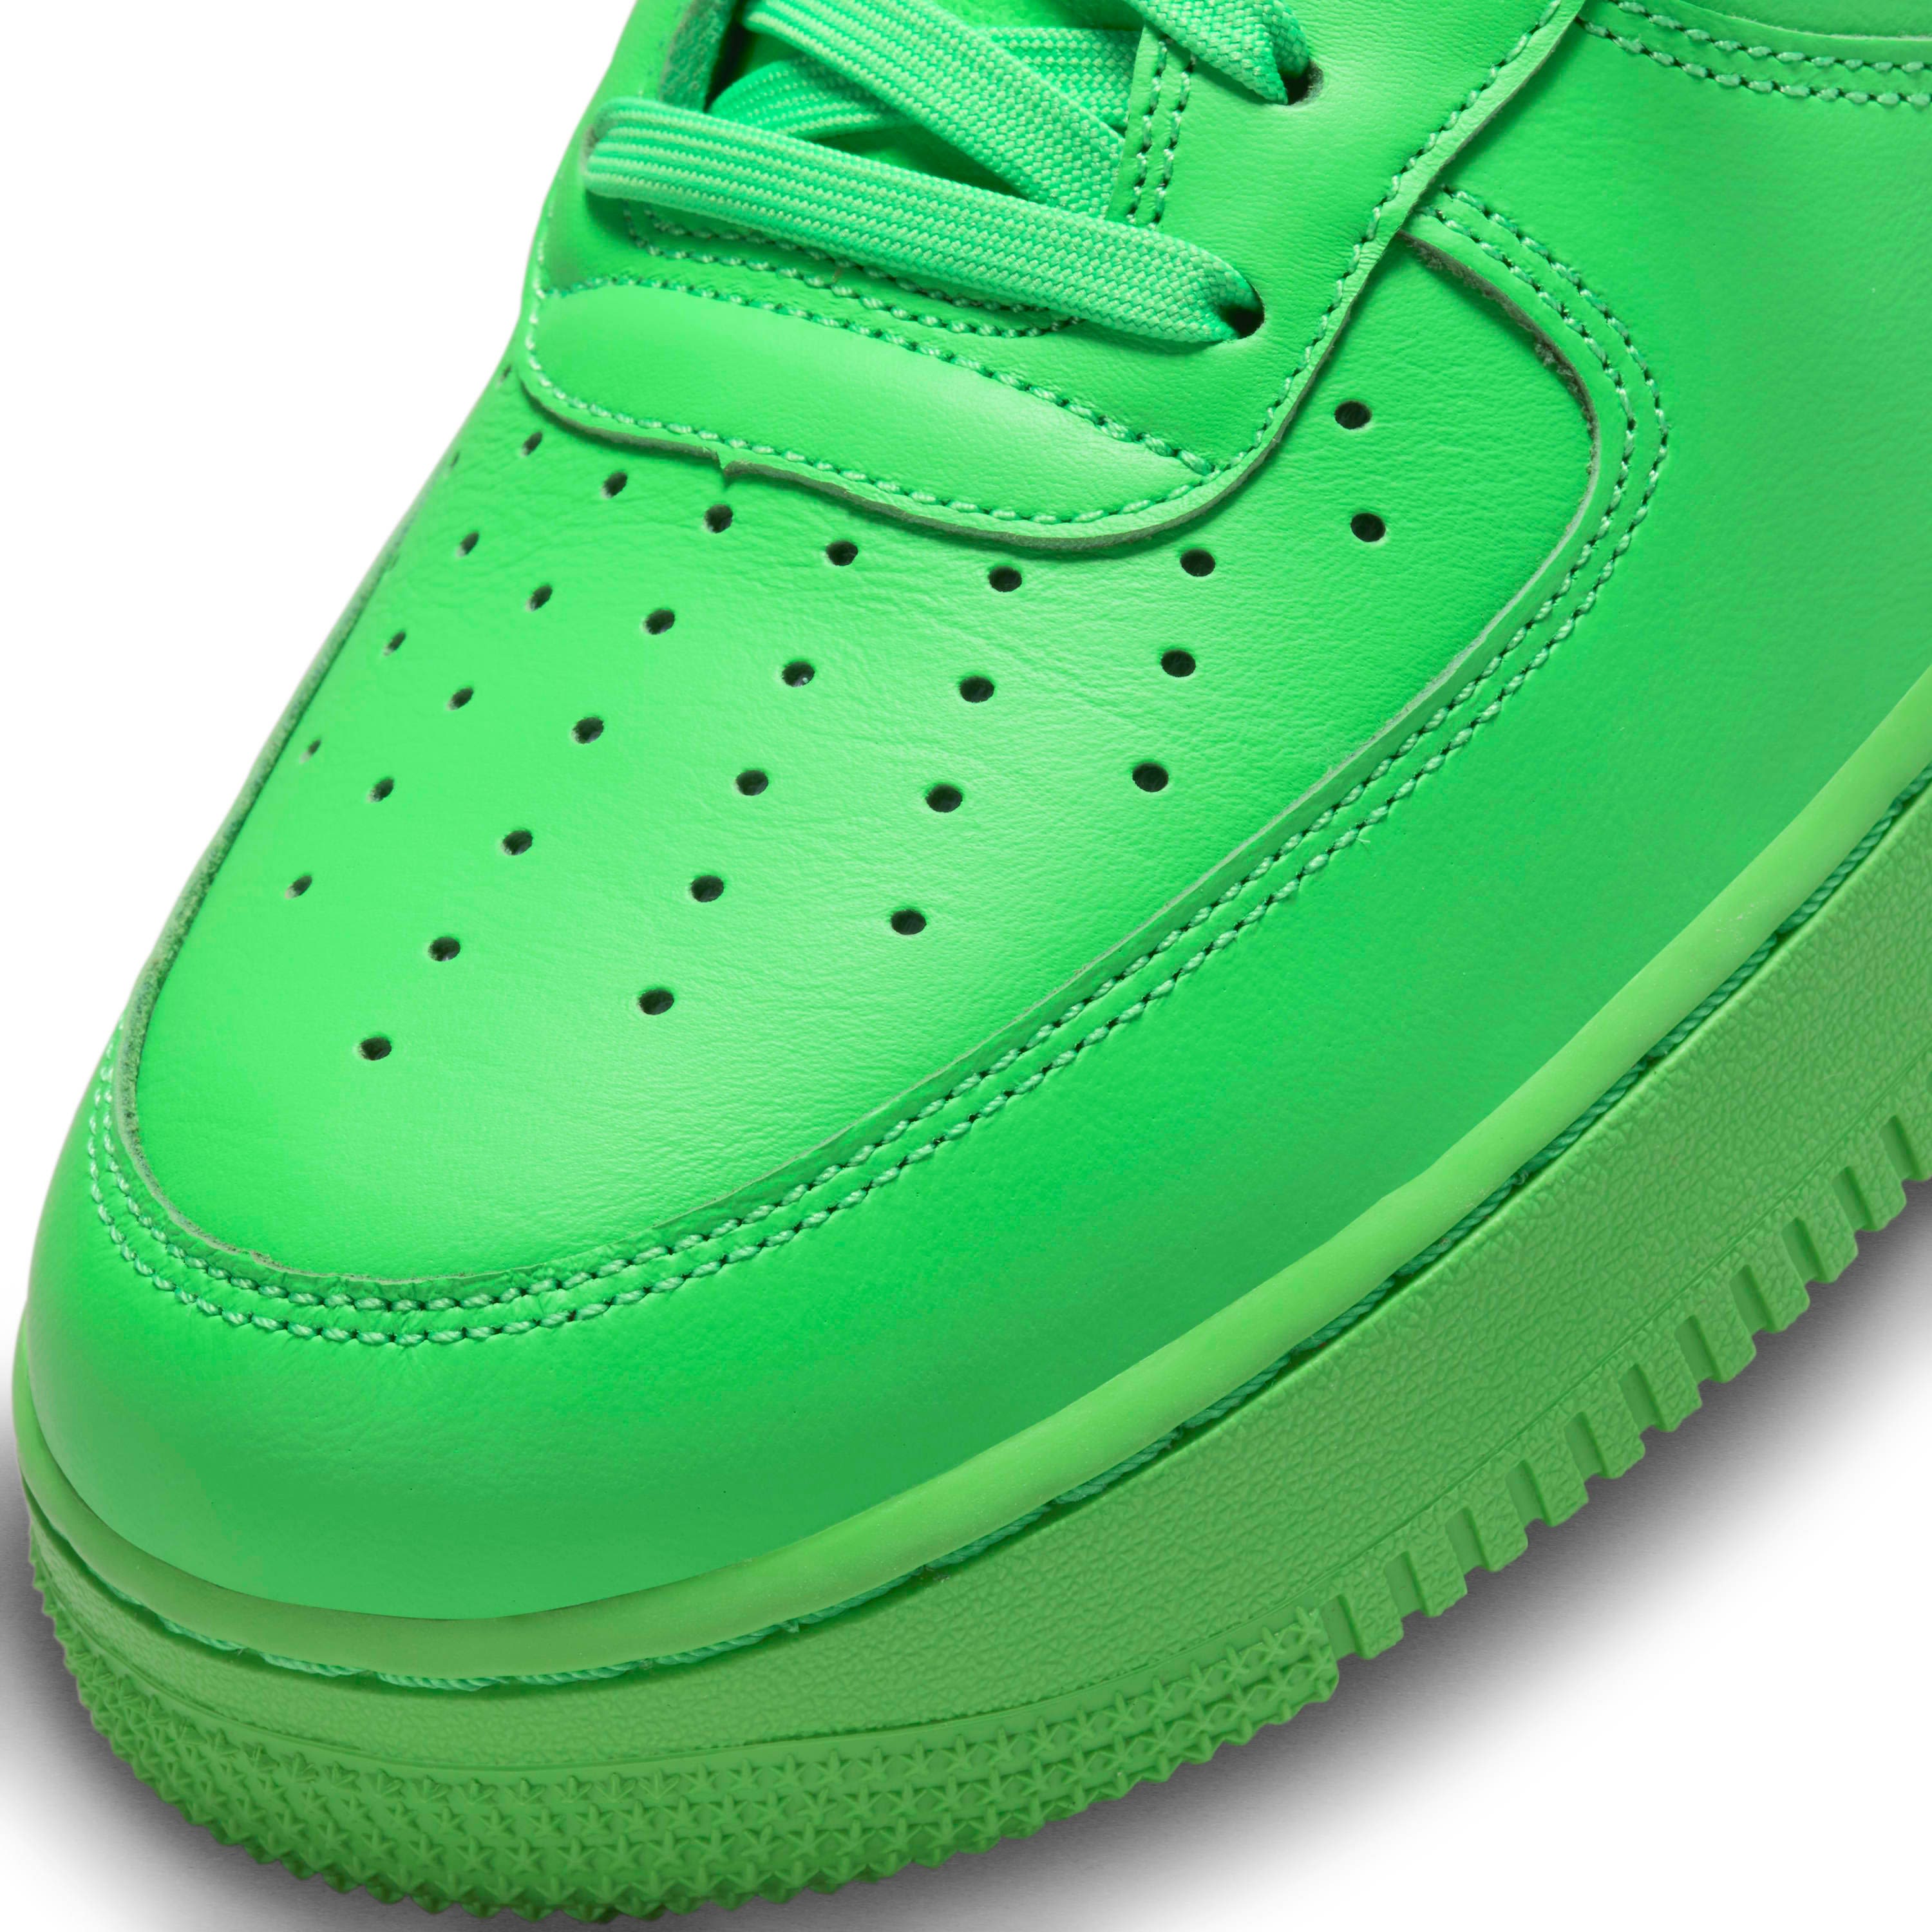 Off-White x Nike Air Force 1 Low 'Green Spark'